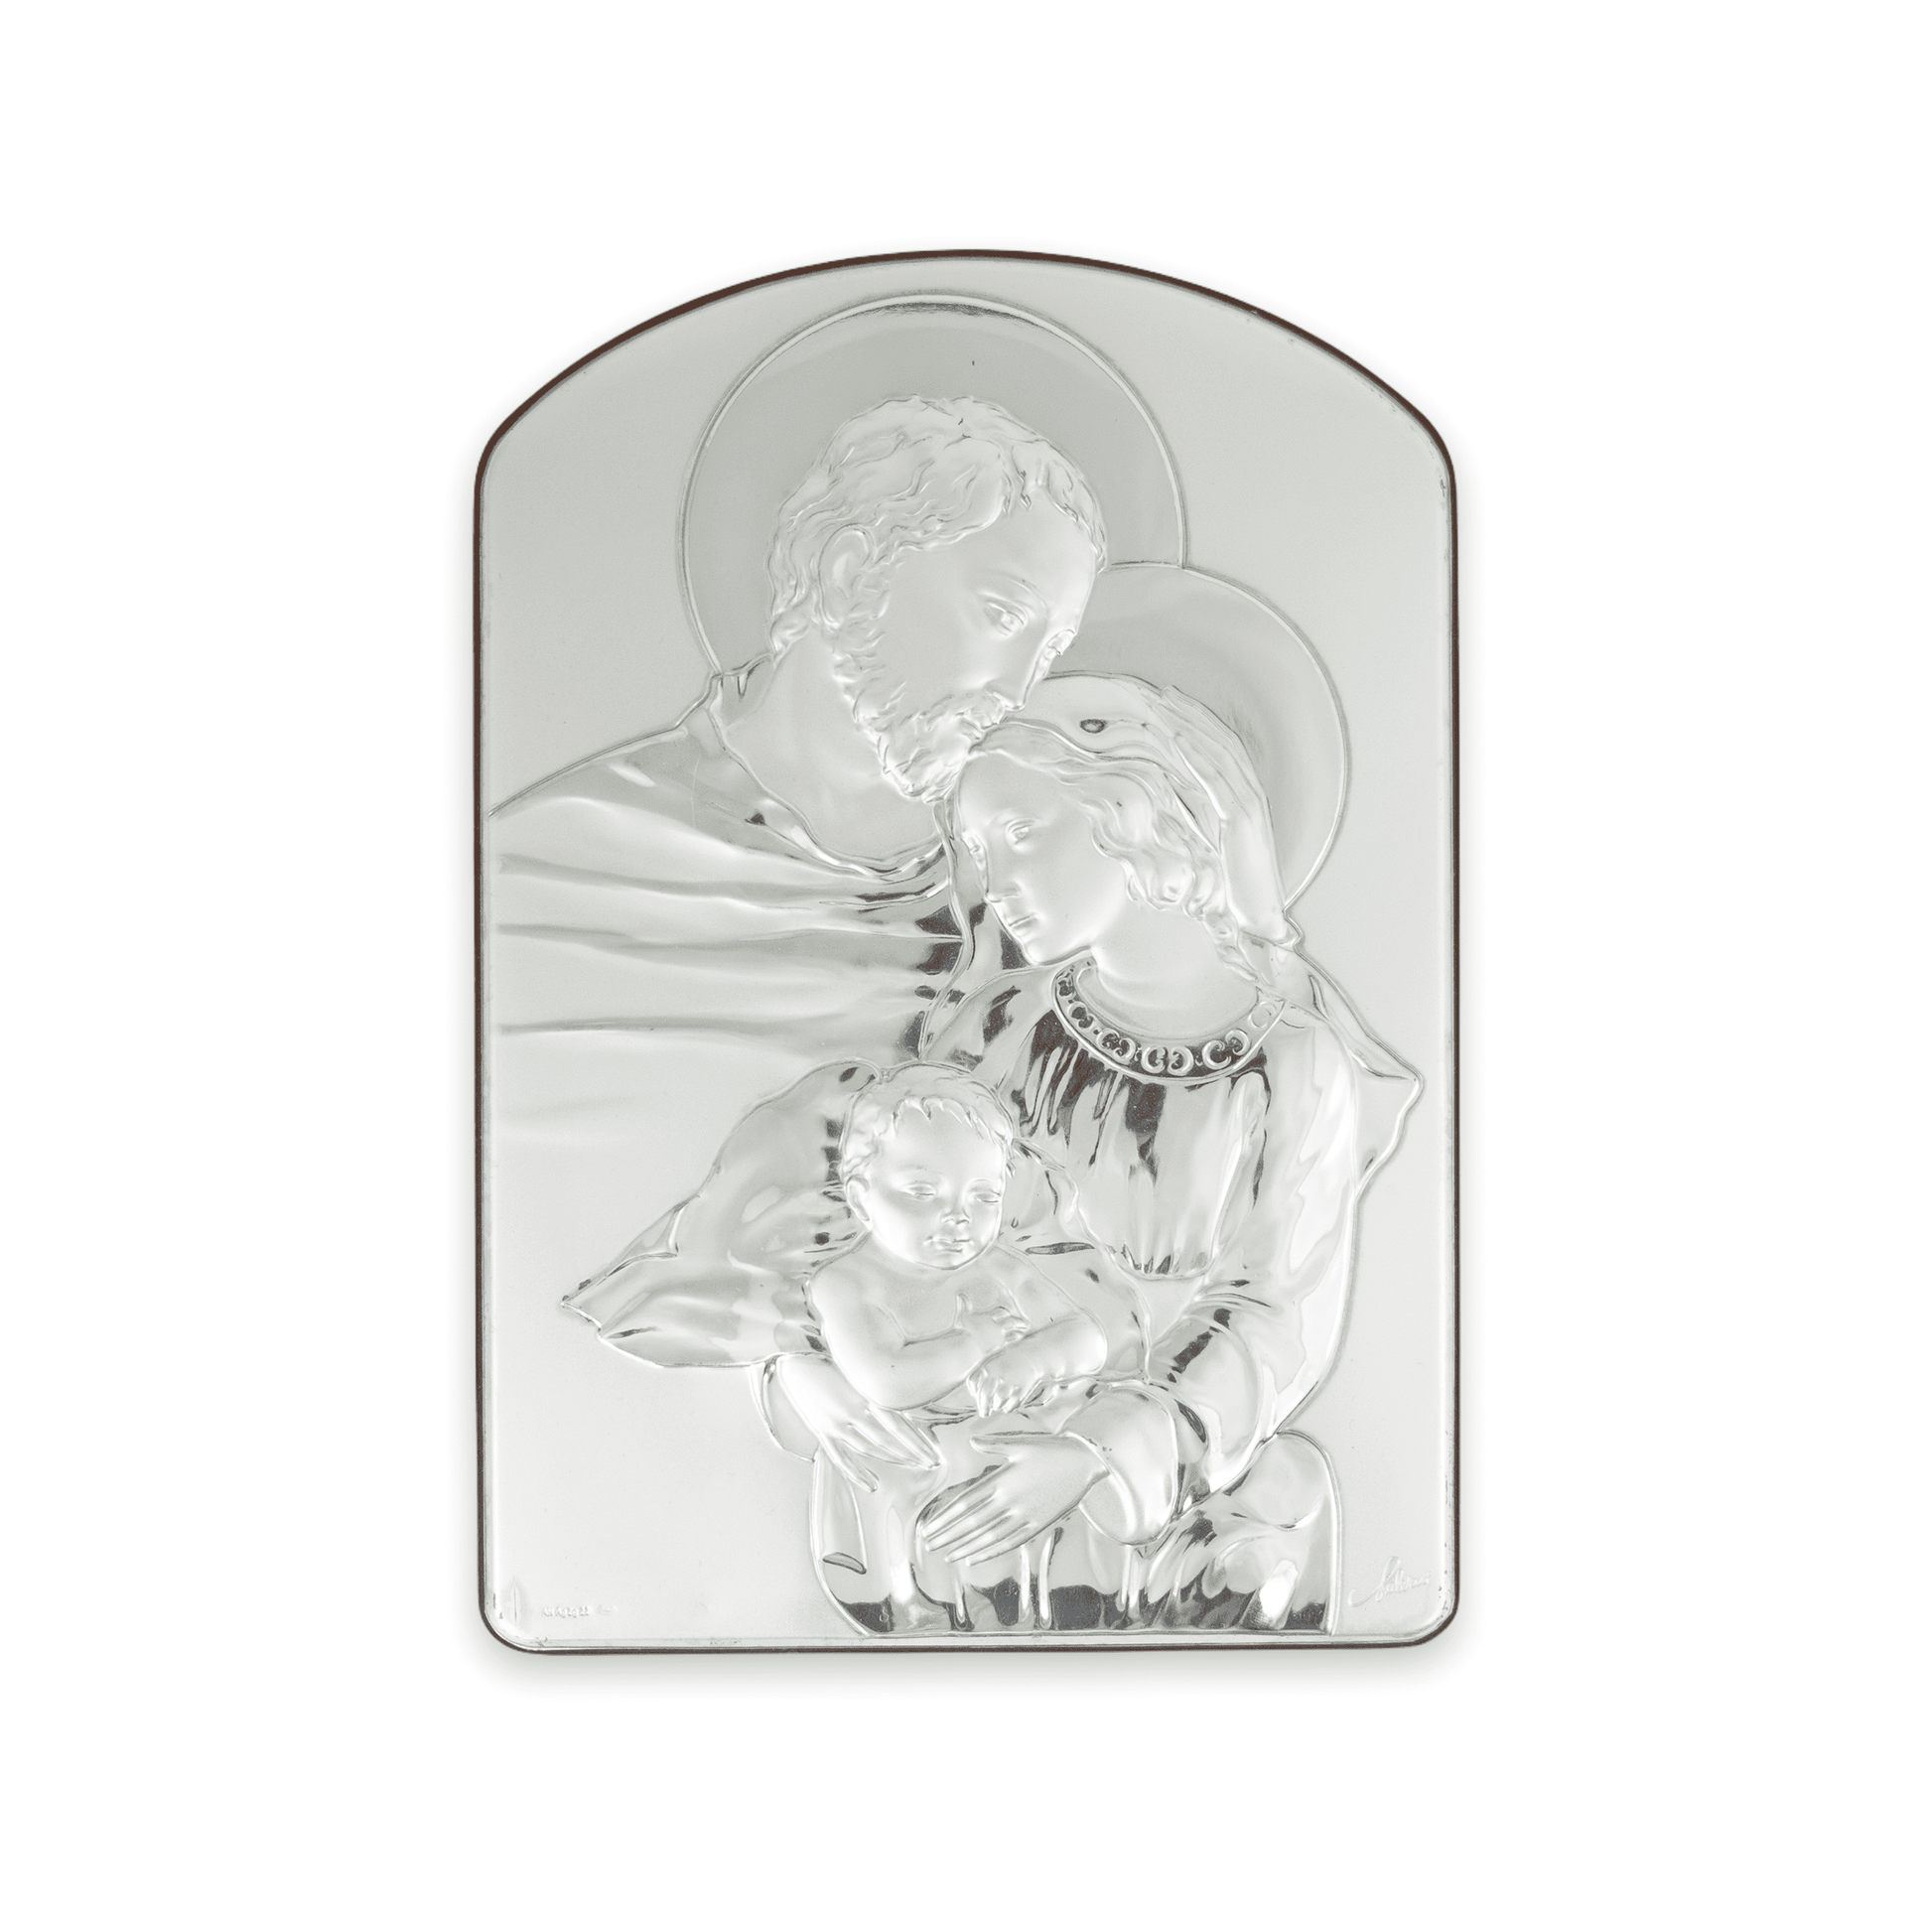 MONDO CATTOLICO 9x6 cm Holy Family Painting Sterling Silver Bilaminate